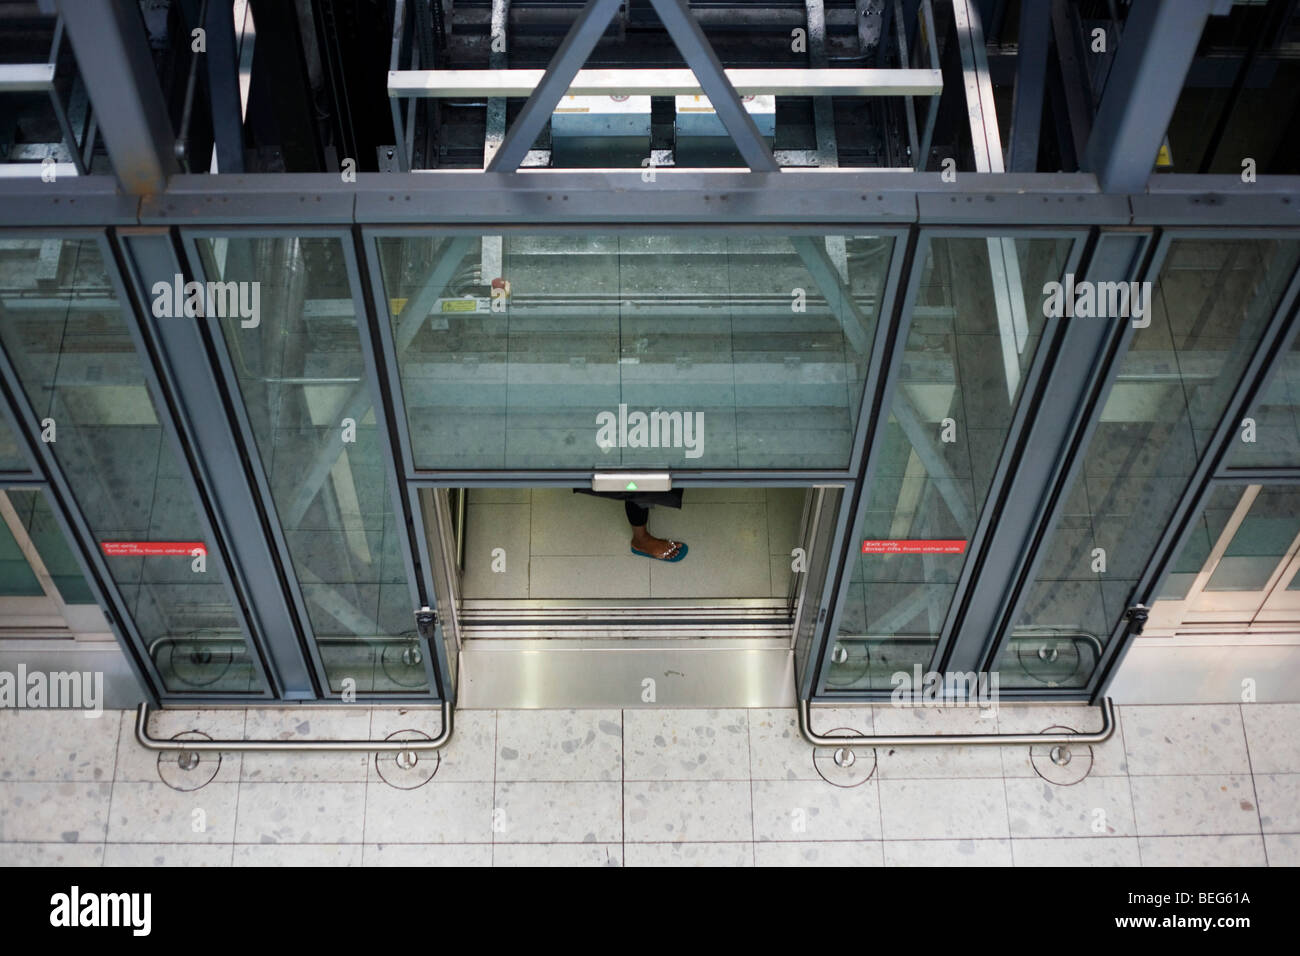 Heathrow Express lift passenger's foot and architecture at Heathrow airport's terminal 5. Stock Photo